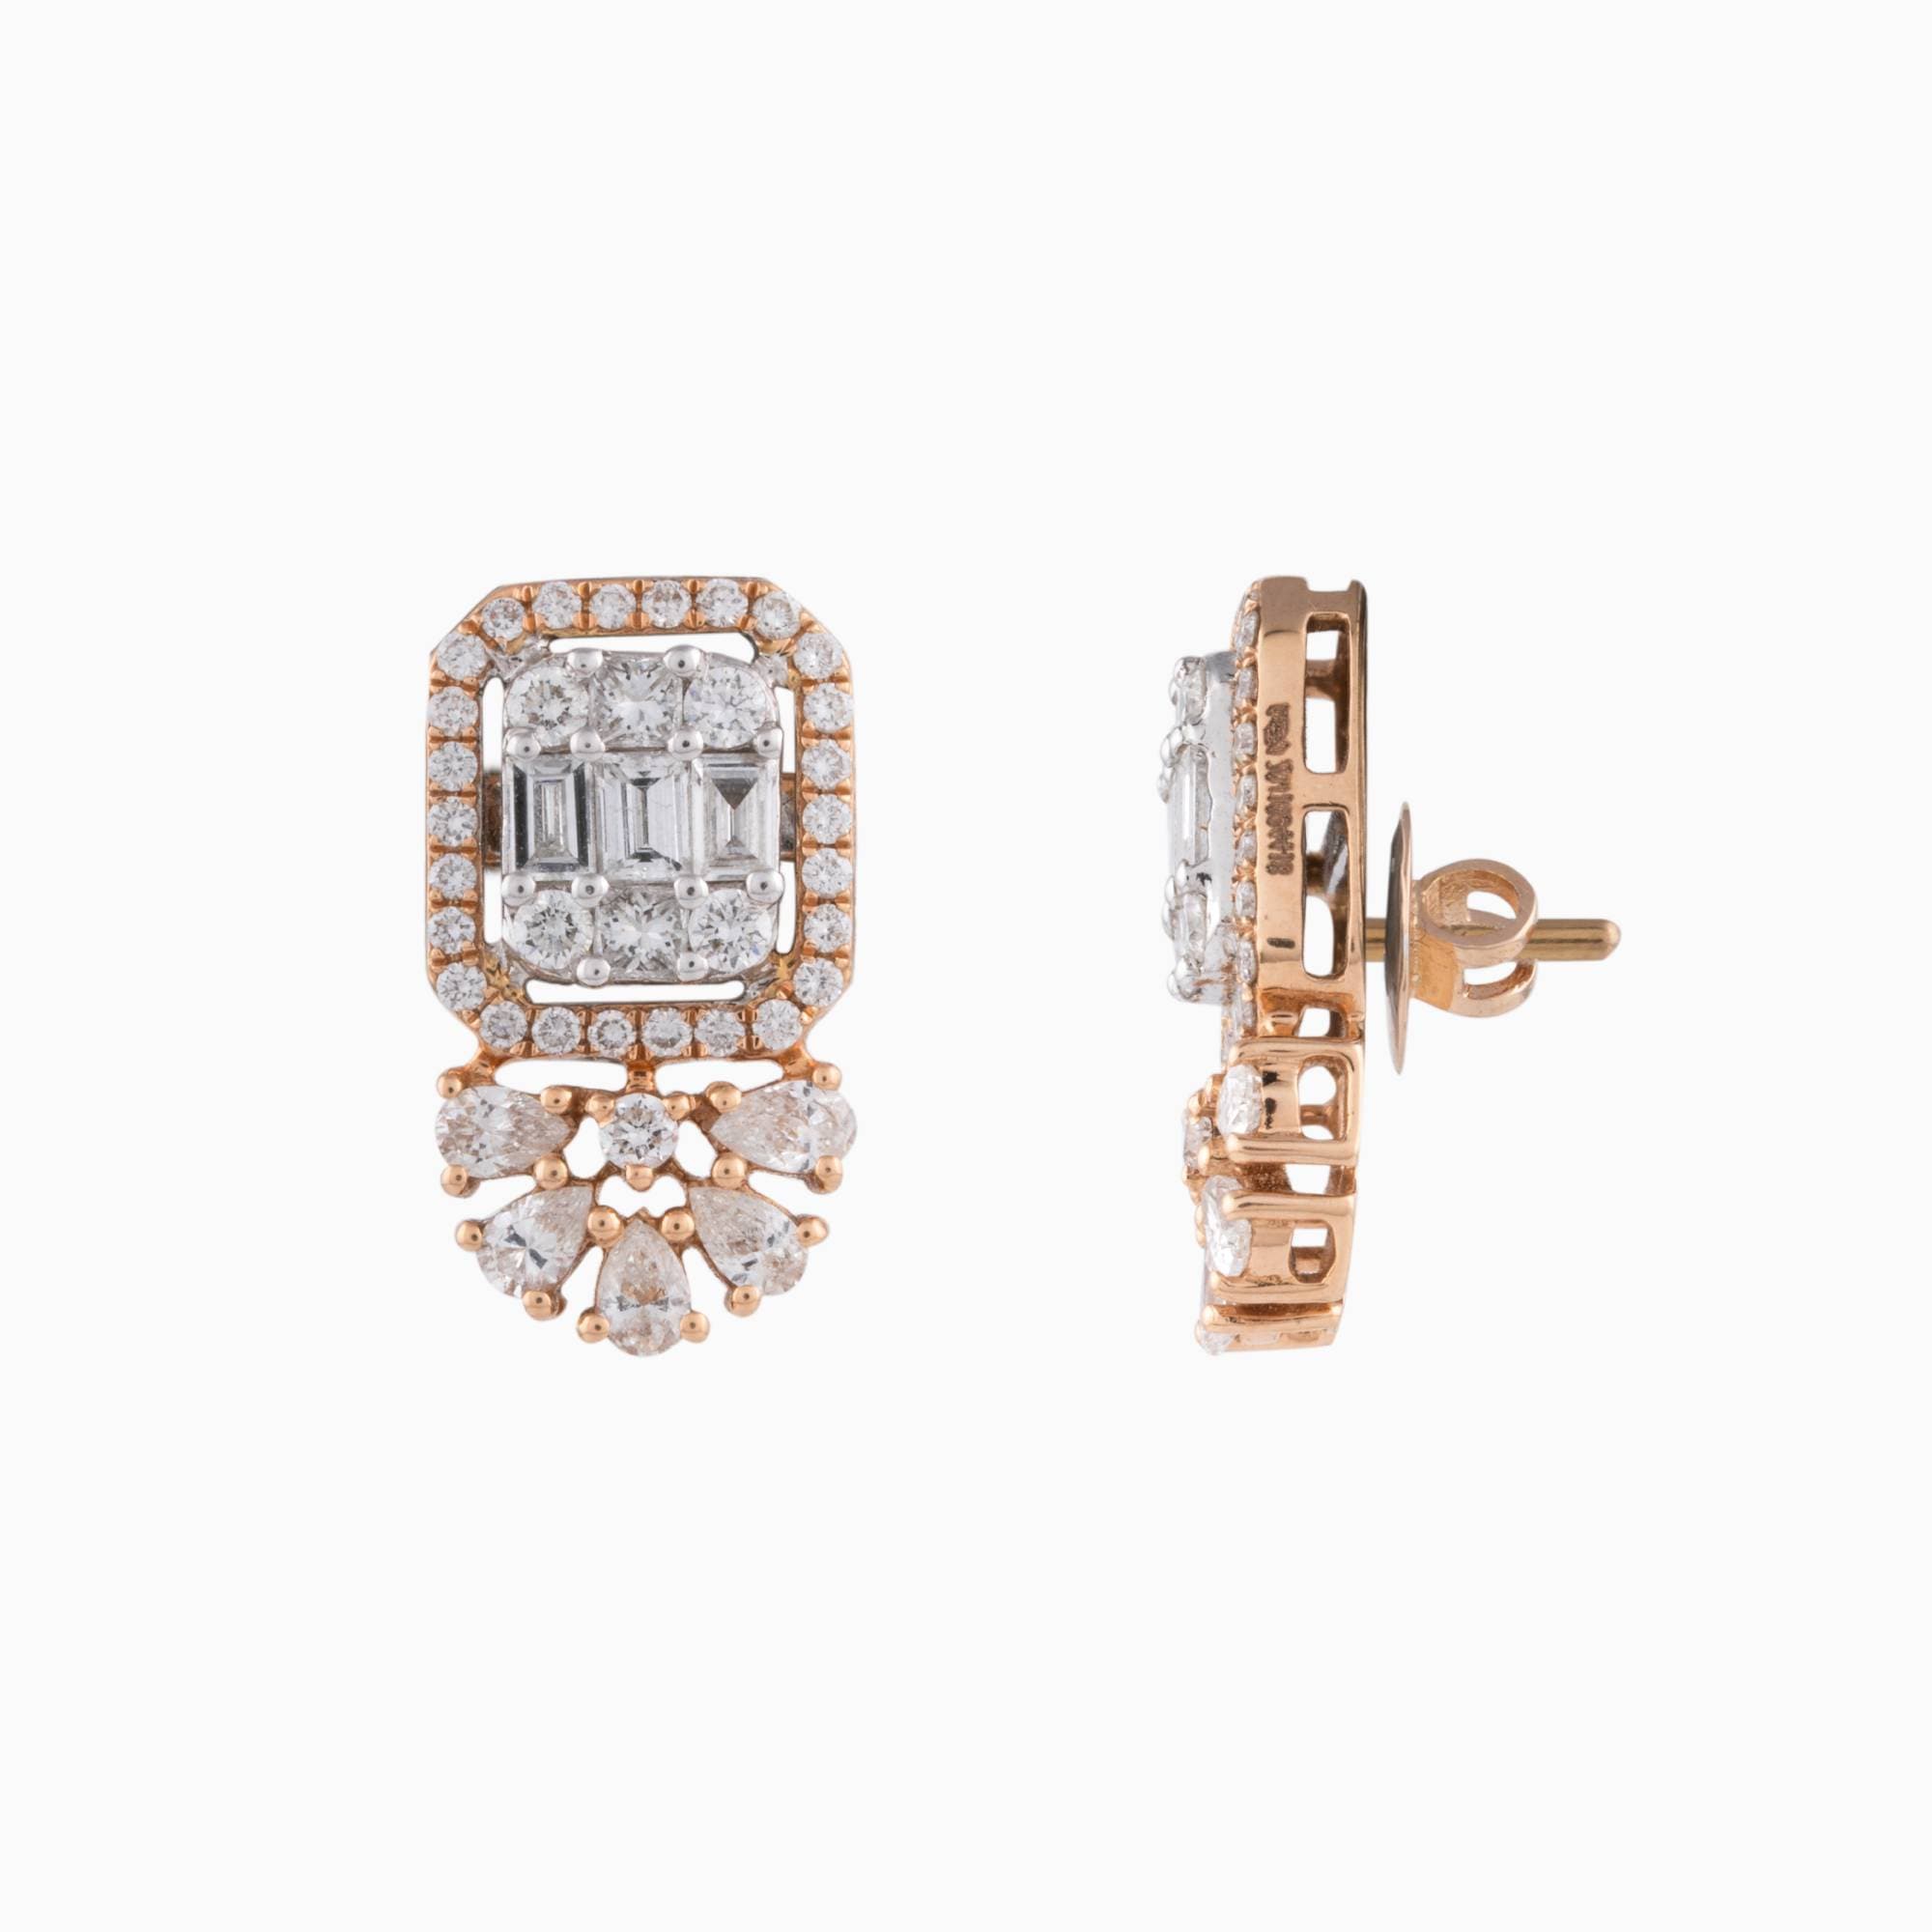 Earring Pair with Mix Shape Diamonds-PGDE0138